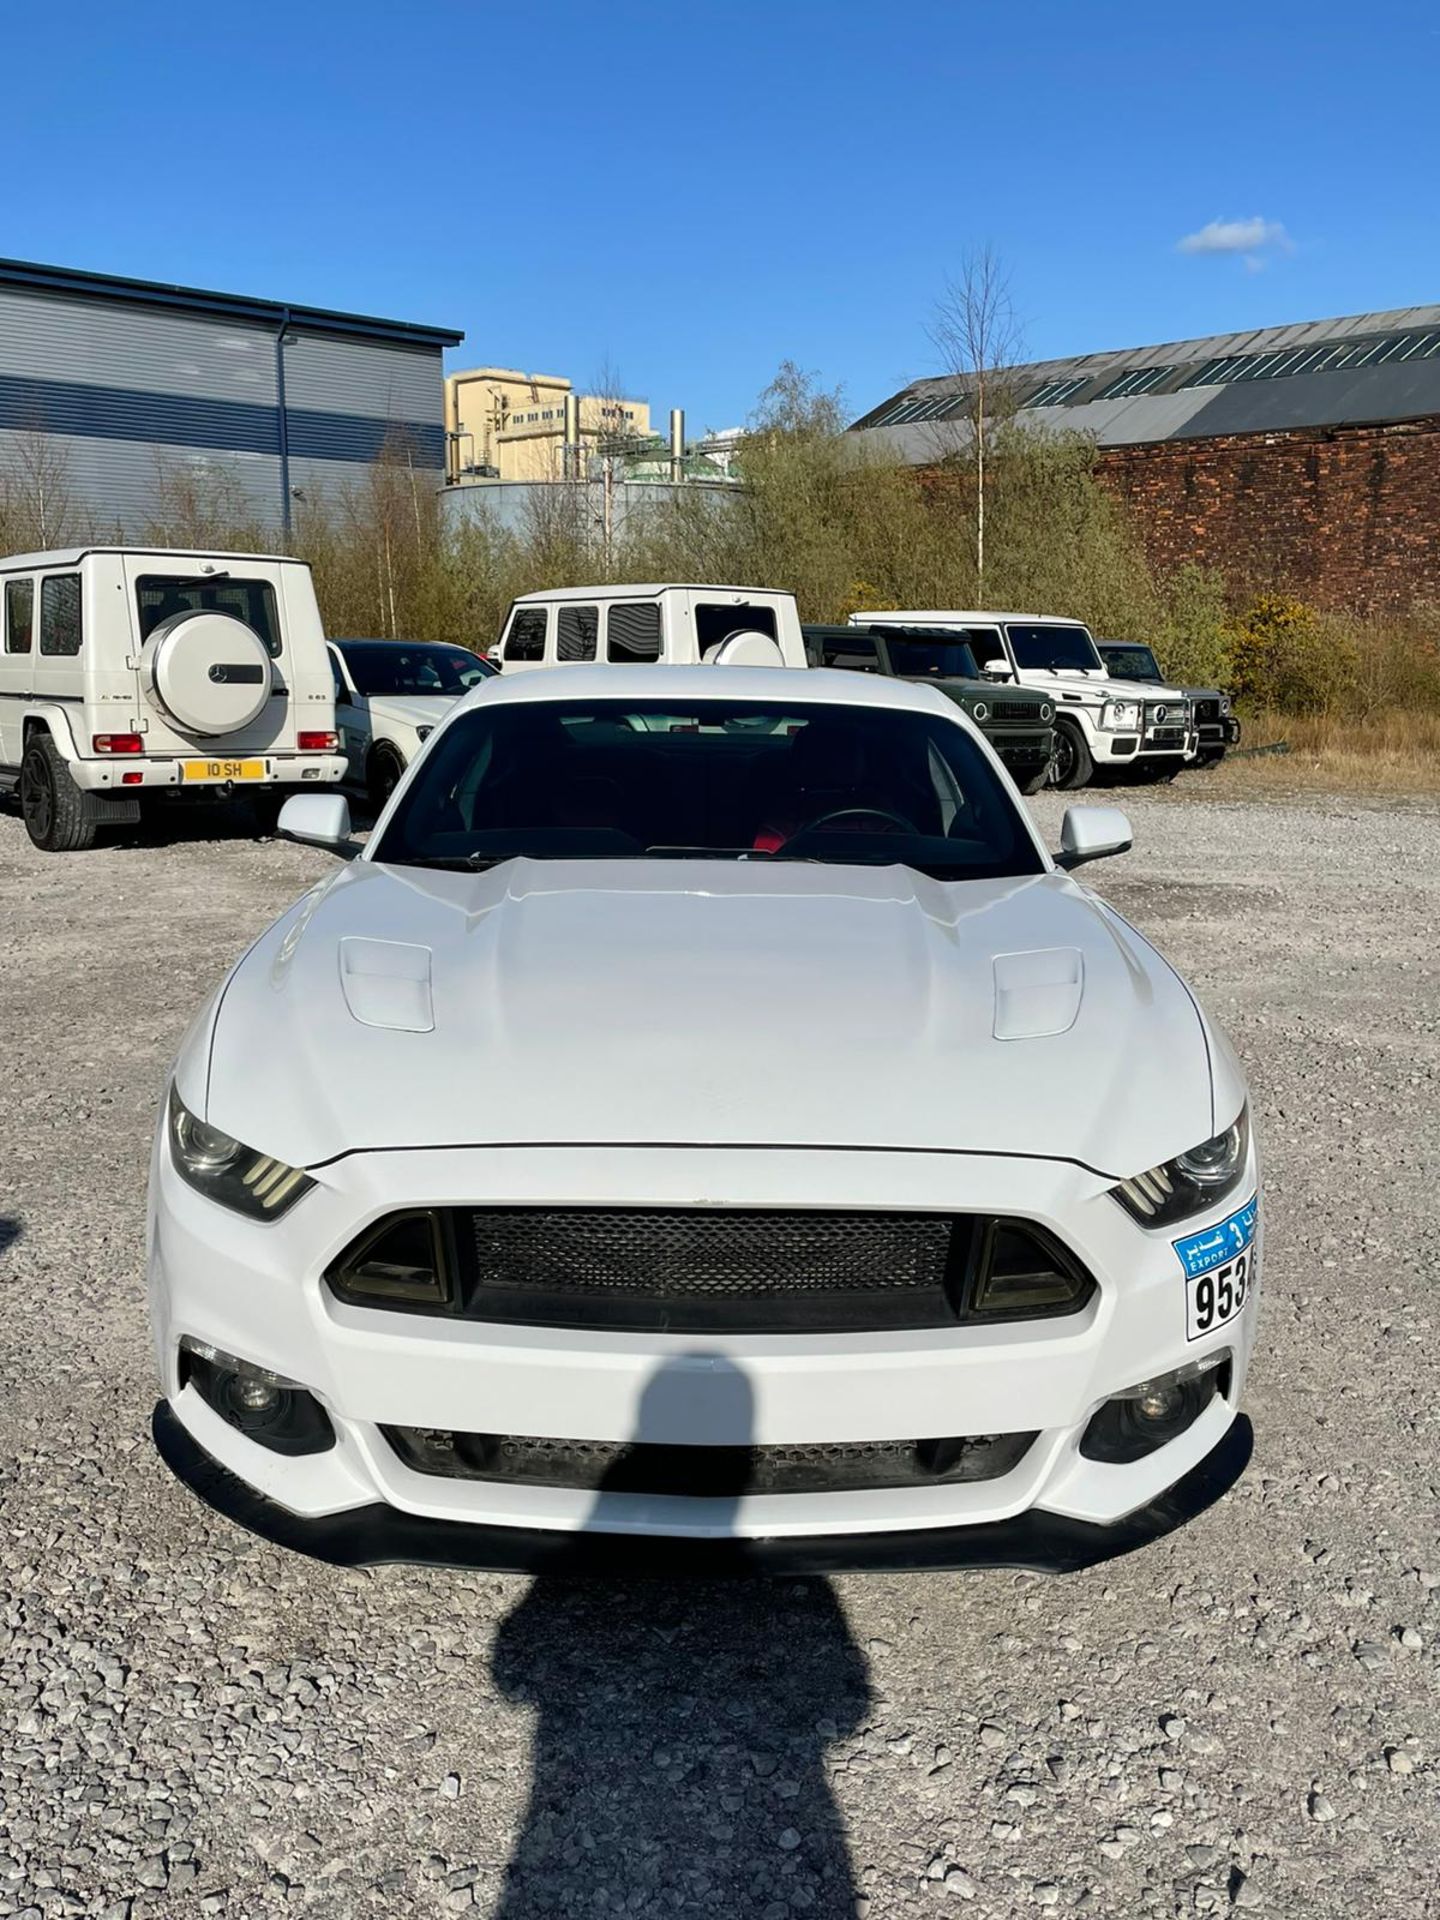 2016 Ford Mustang GT 5.0 V8 automatic - 40,000km